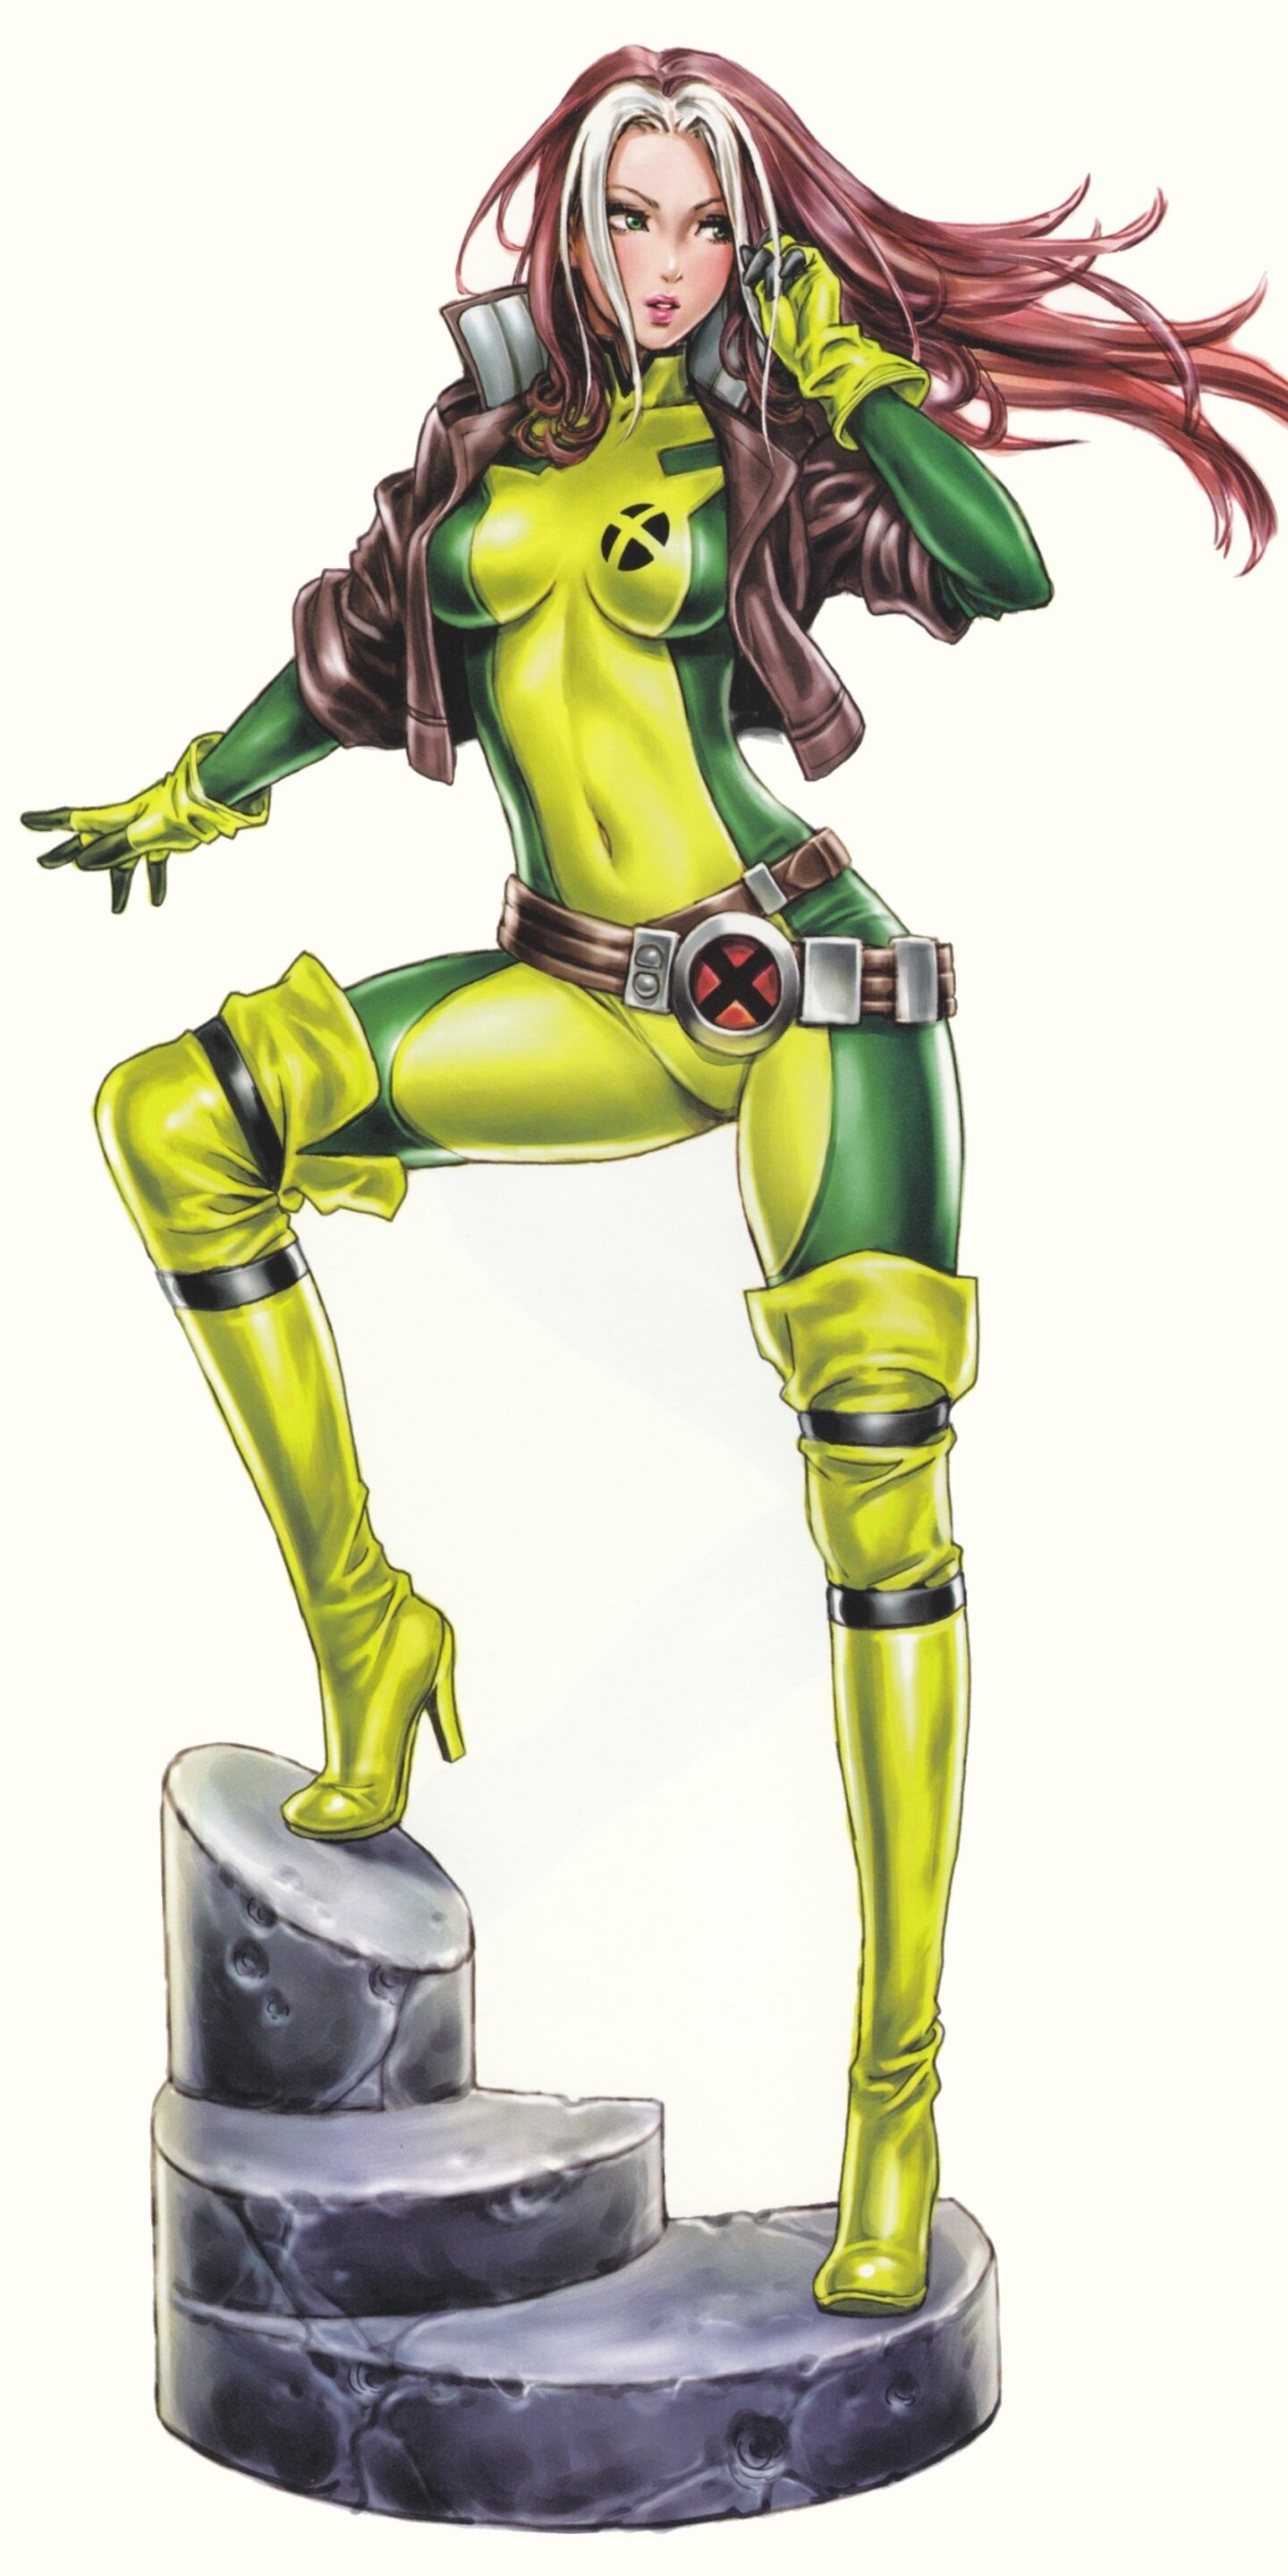 Rogue (Marvel): Comics, Initially depicted as a reluctant supervillain, but she soon joins the X-Men as a superhero. 1440x2880 HD Wallpaper.